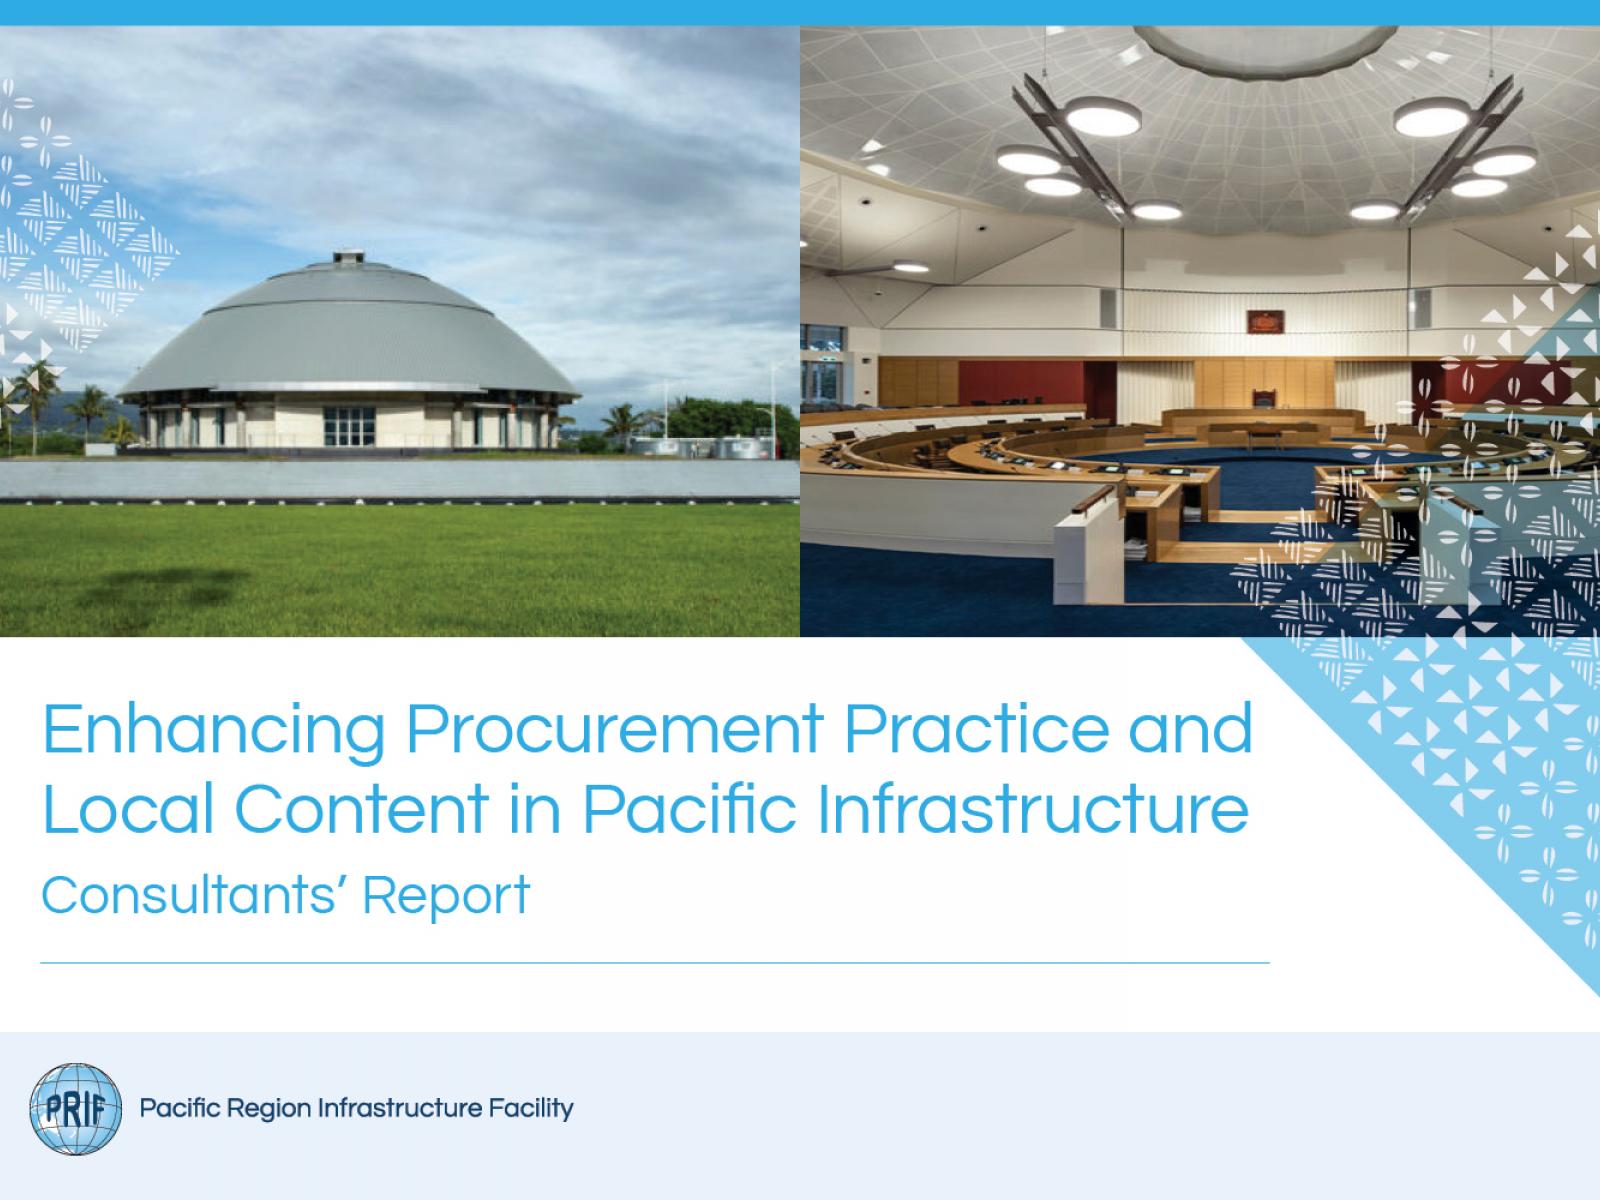 Enhancing Procurement Practice and Local Content in Pacific Infrastructure